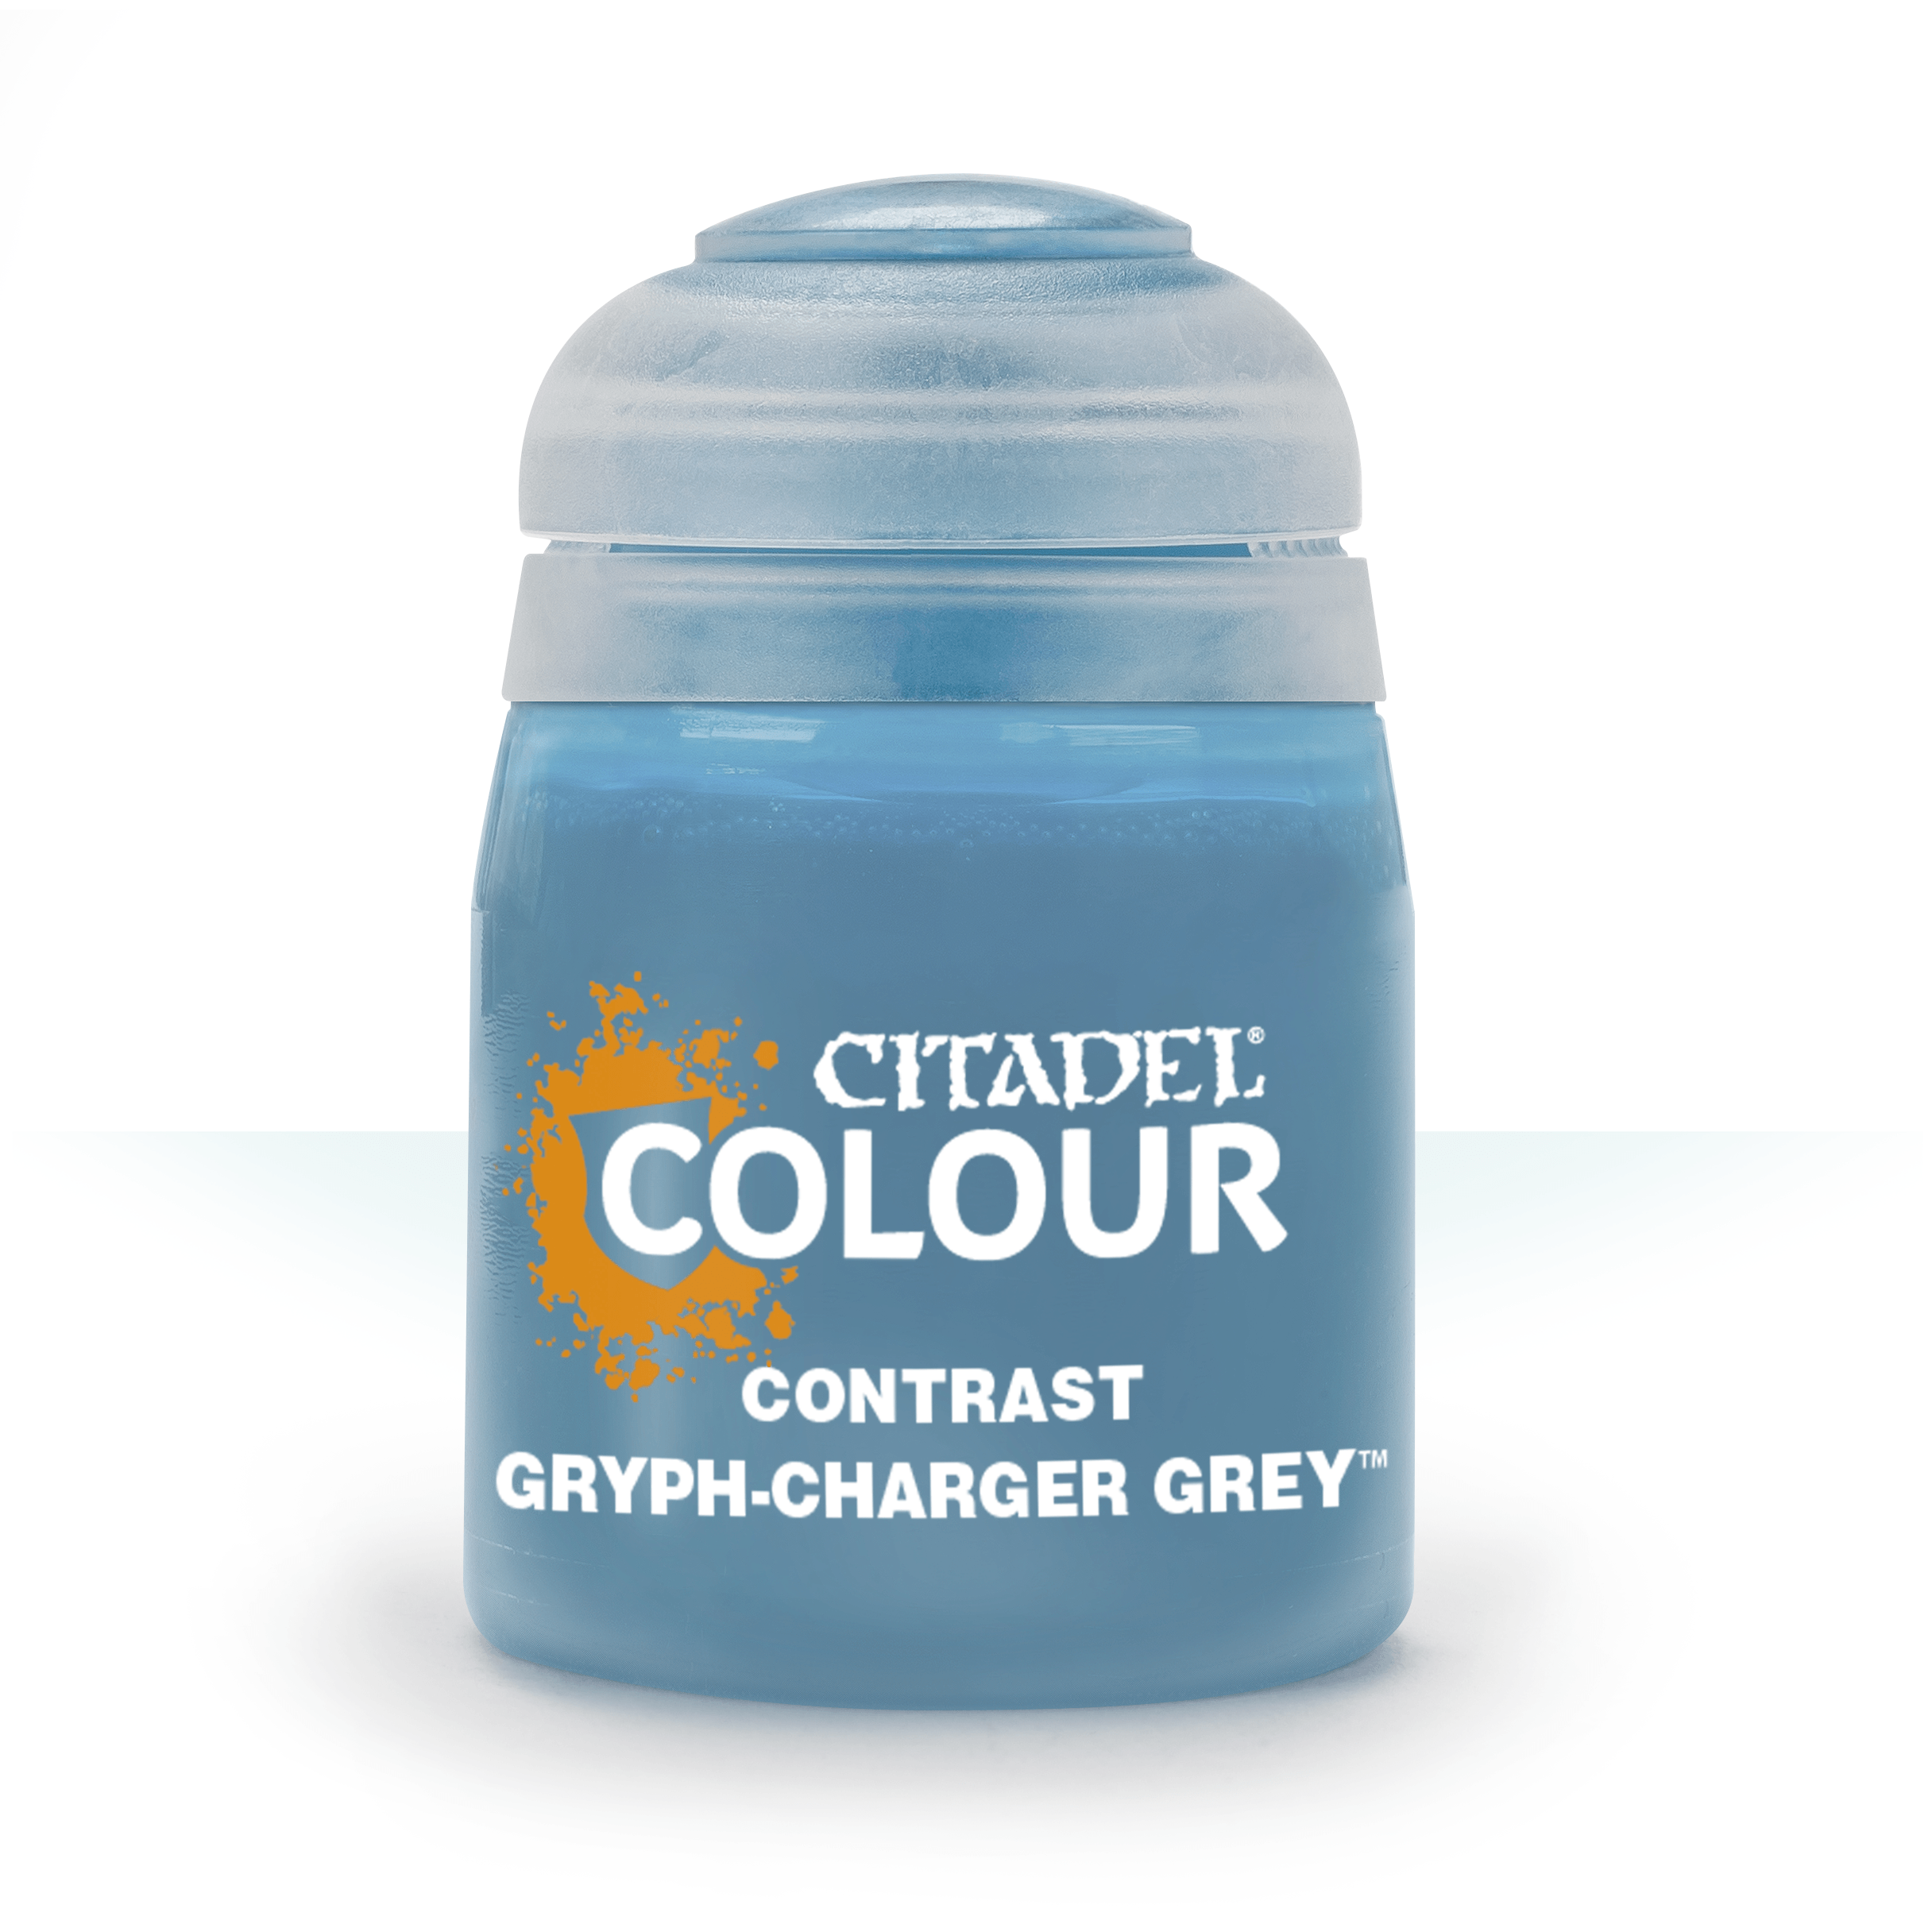 Citadel Contrast Gryph-Charger Grey